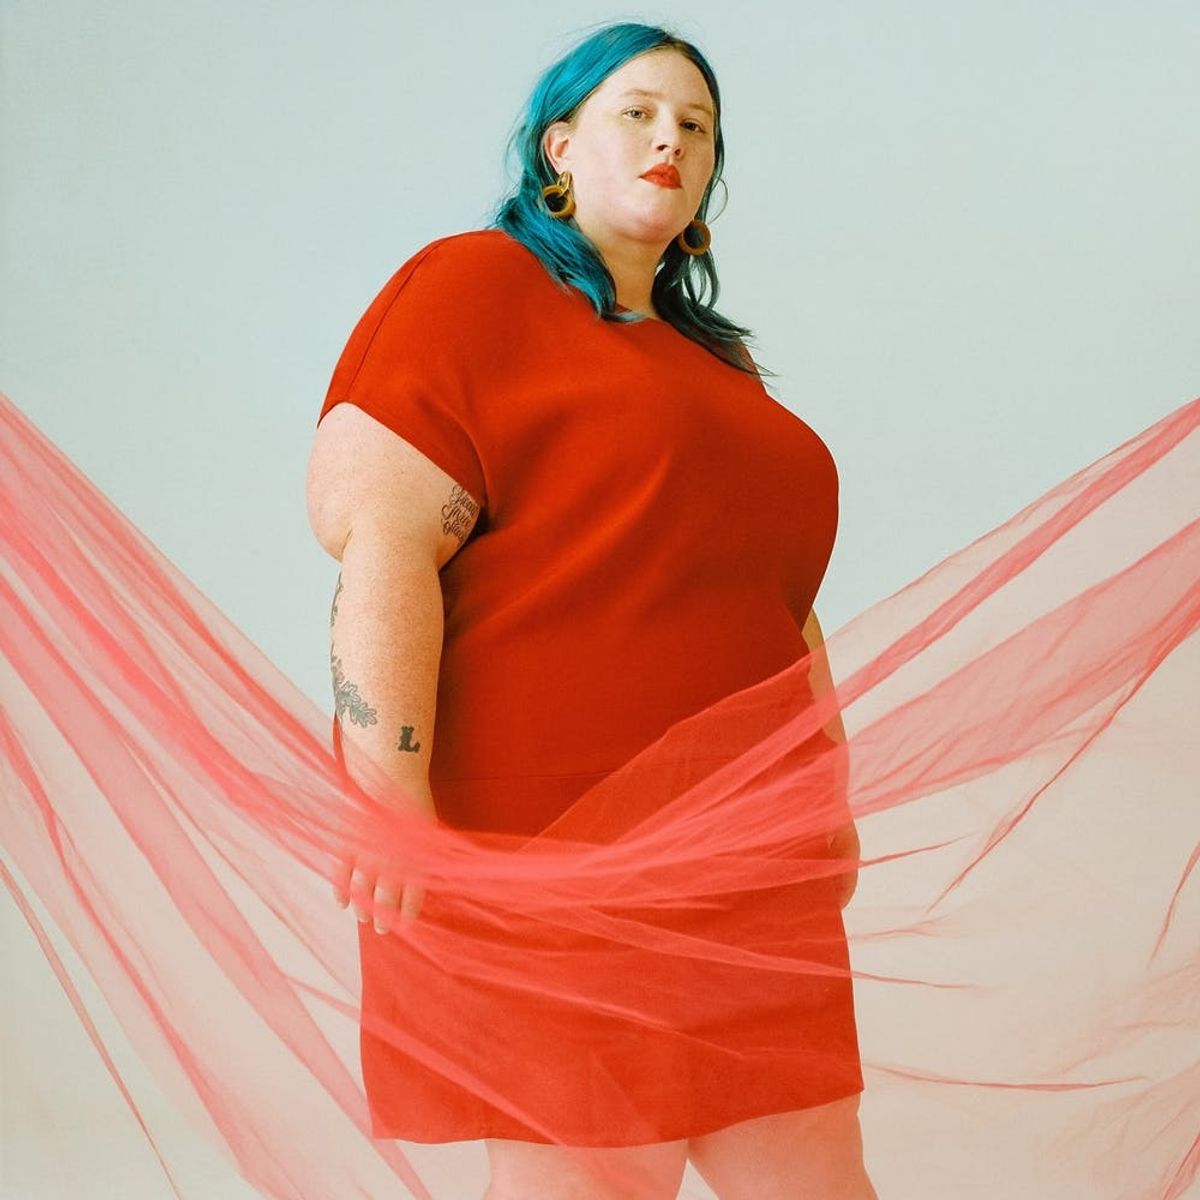 Meet Universal Standard: The Plus-Size Fashion Label That’s on a Mission to Eliminate ‘Plus-Size’